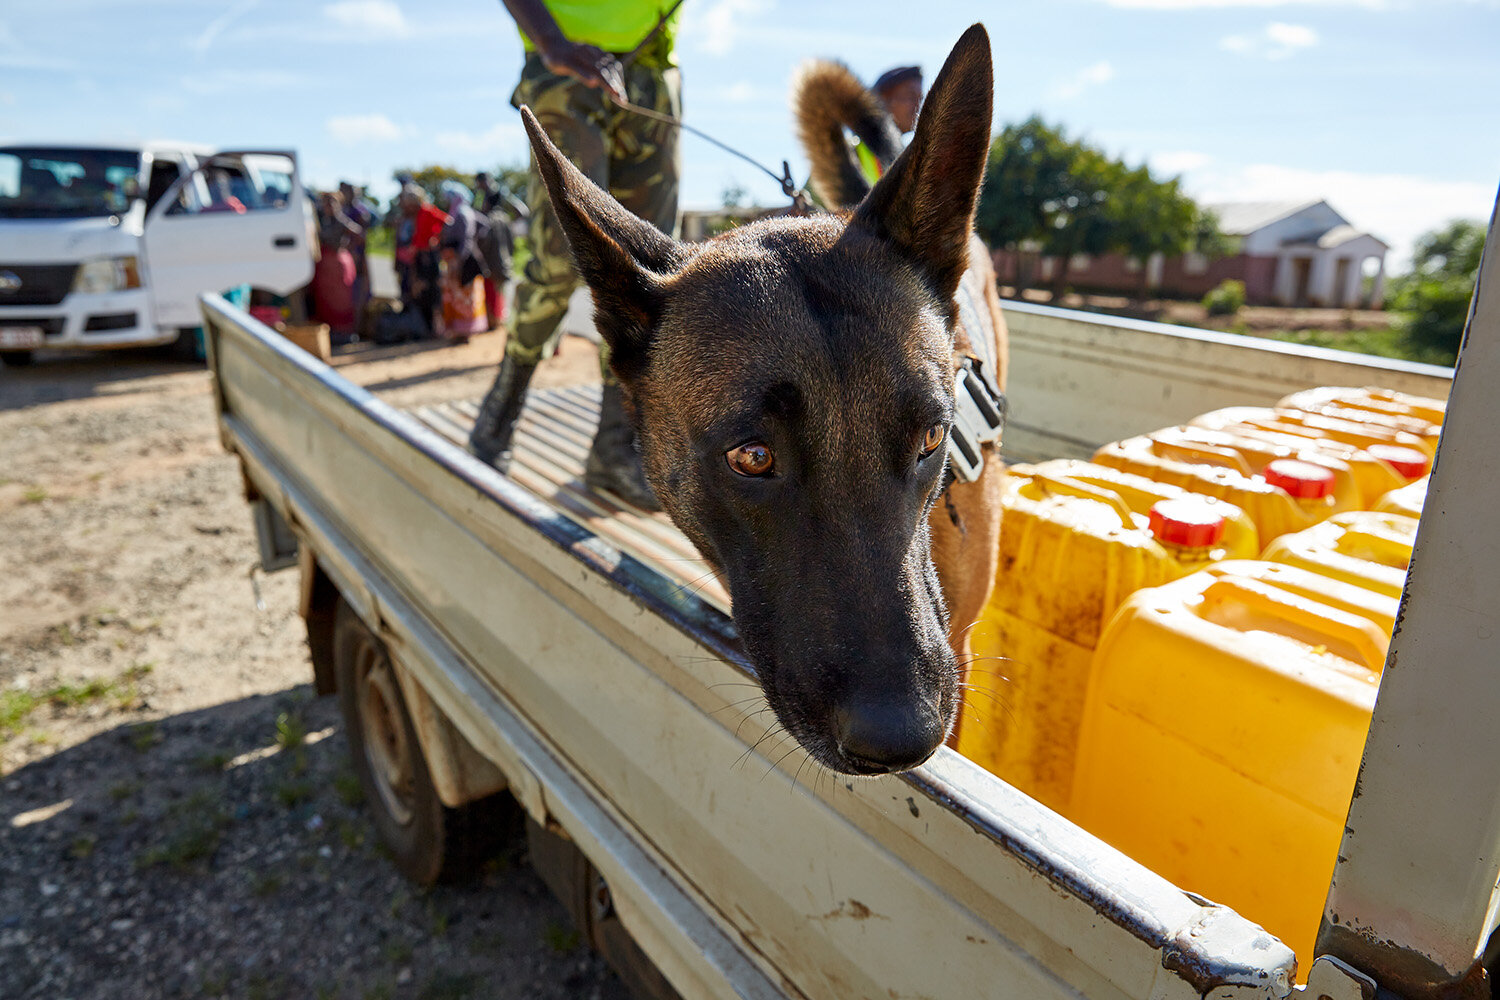  WDDU handler Peter and dog Tim search a row of plastic jerrycans on the back of a truck at a police road block, Lilongwe, Malawi, 2020. 